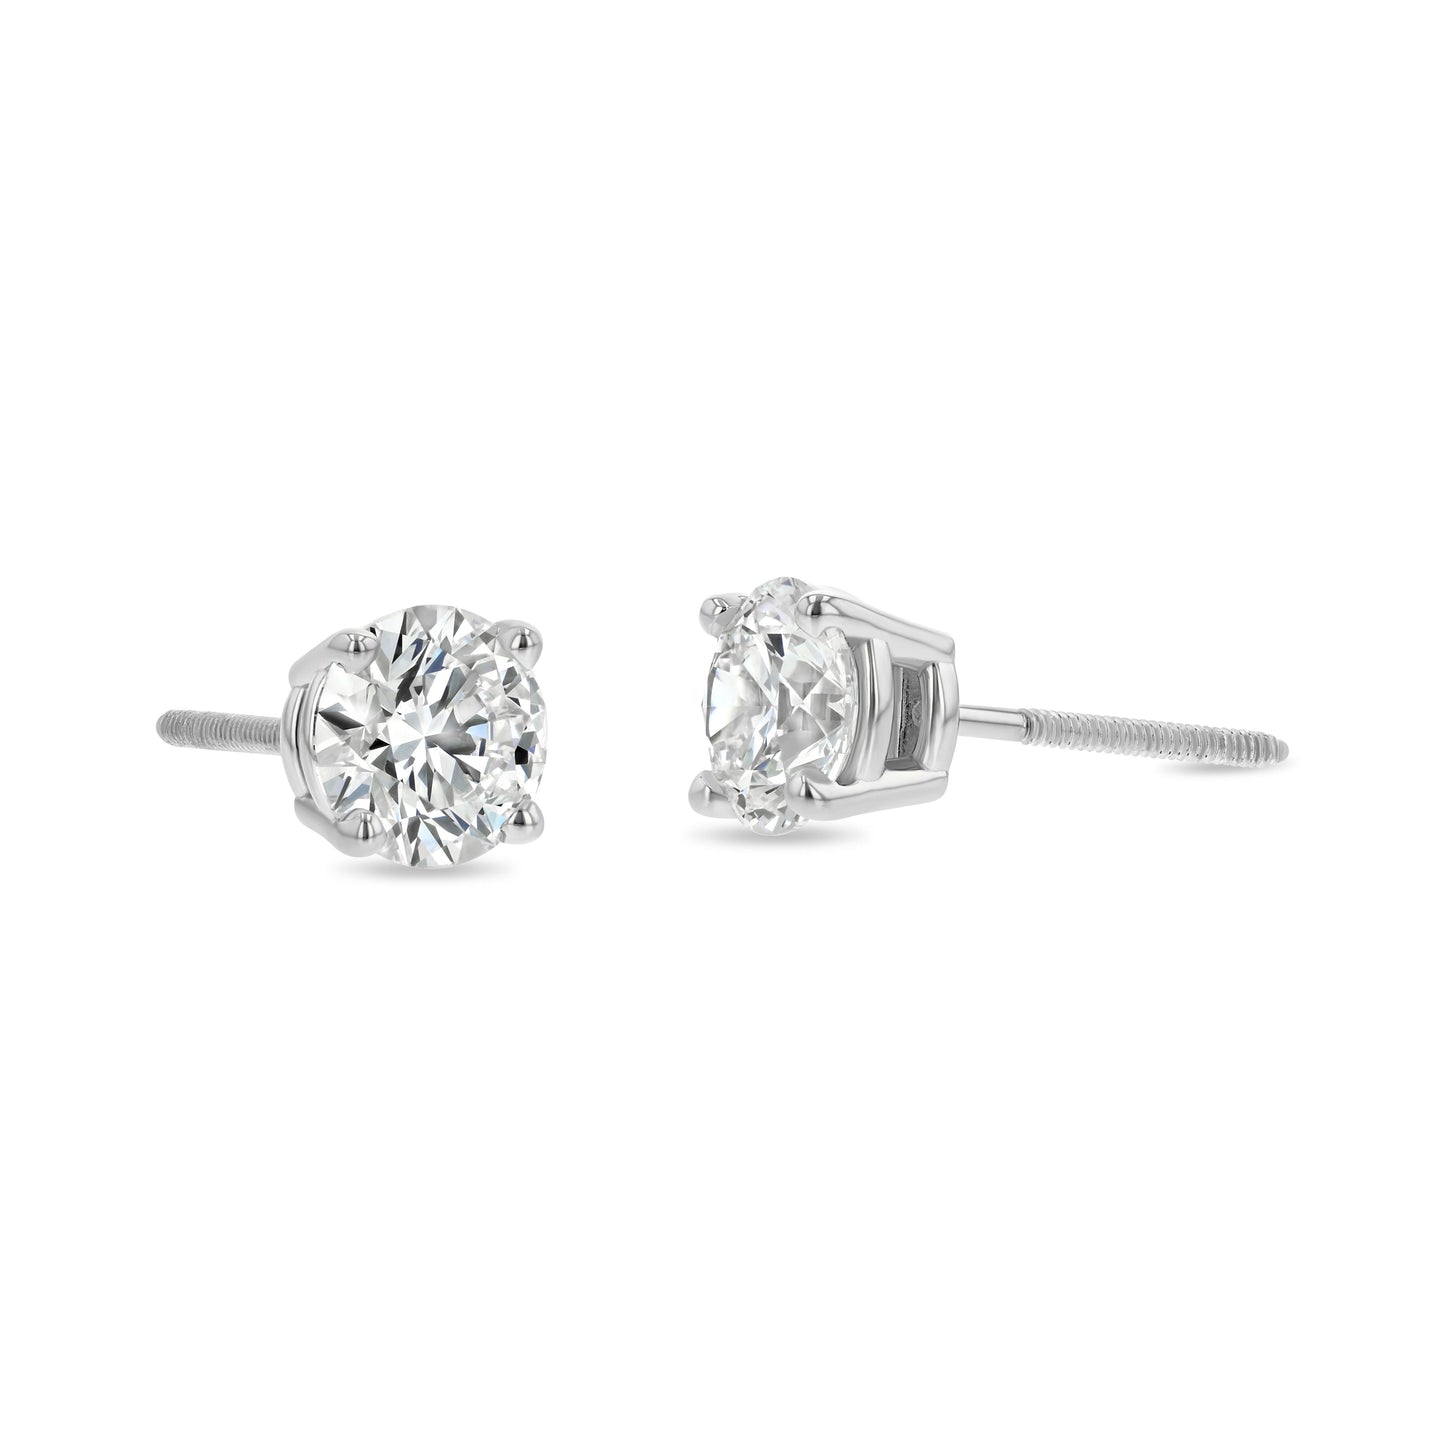 18k White Gold 4-prong Round Brilliant Diamond Stud Earrings (0.32 Ct. T.w., Si1-si2 Clarity, J-k Color)